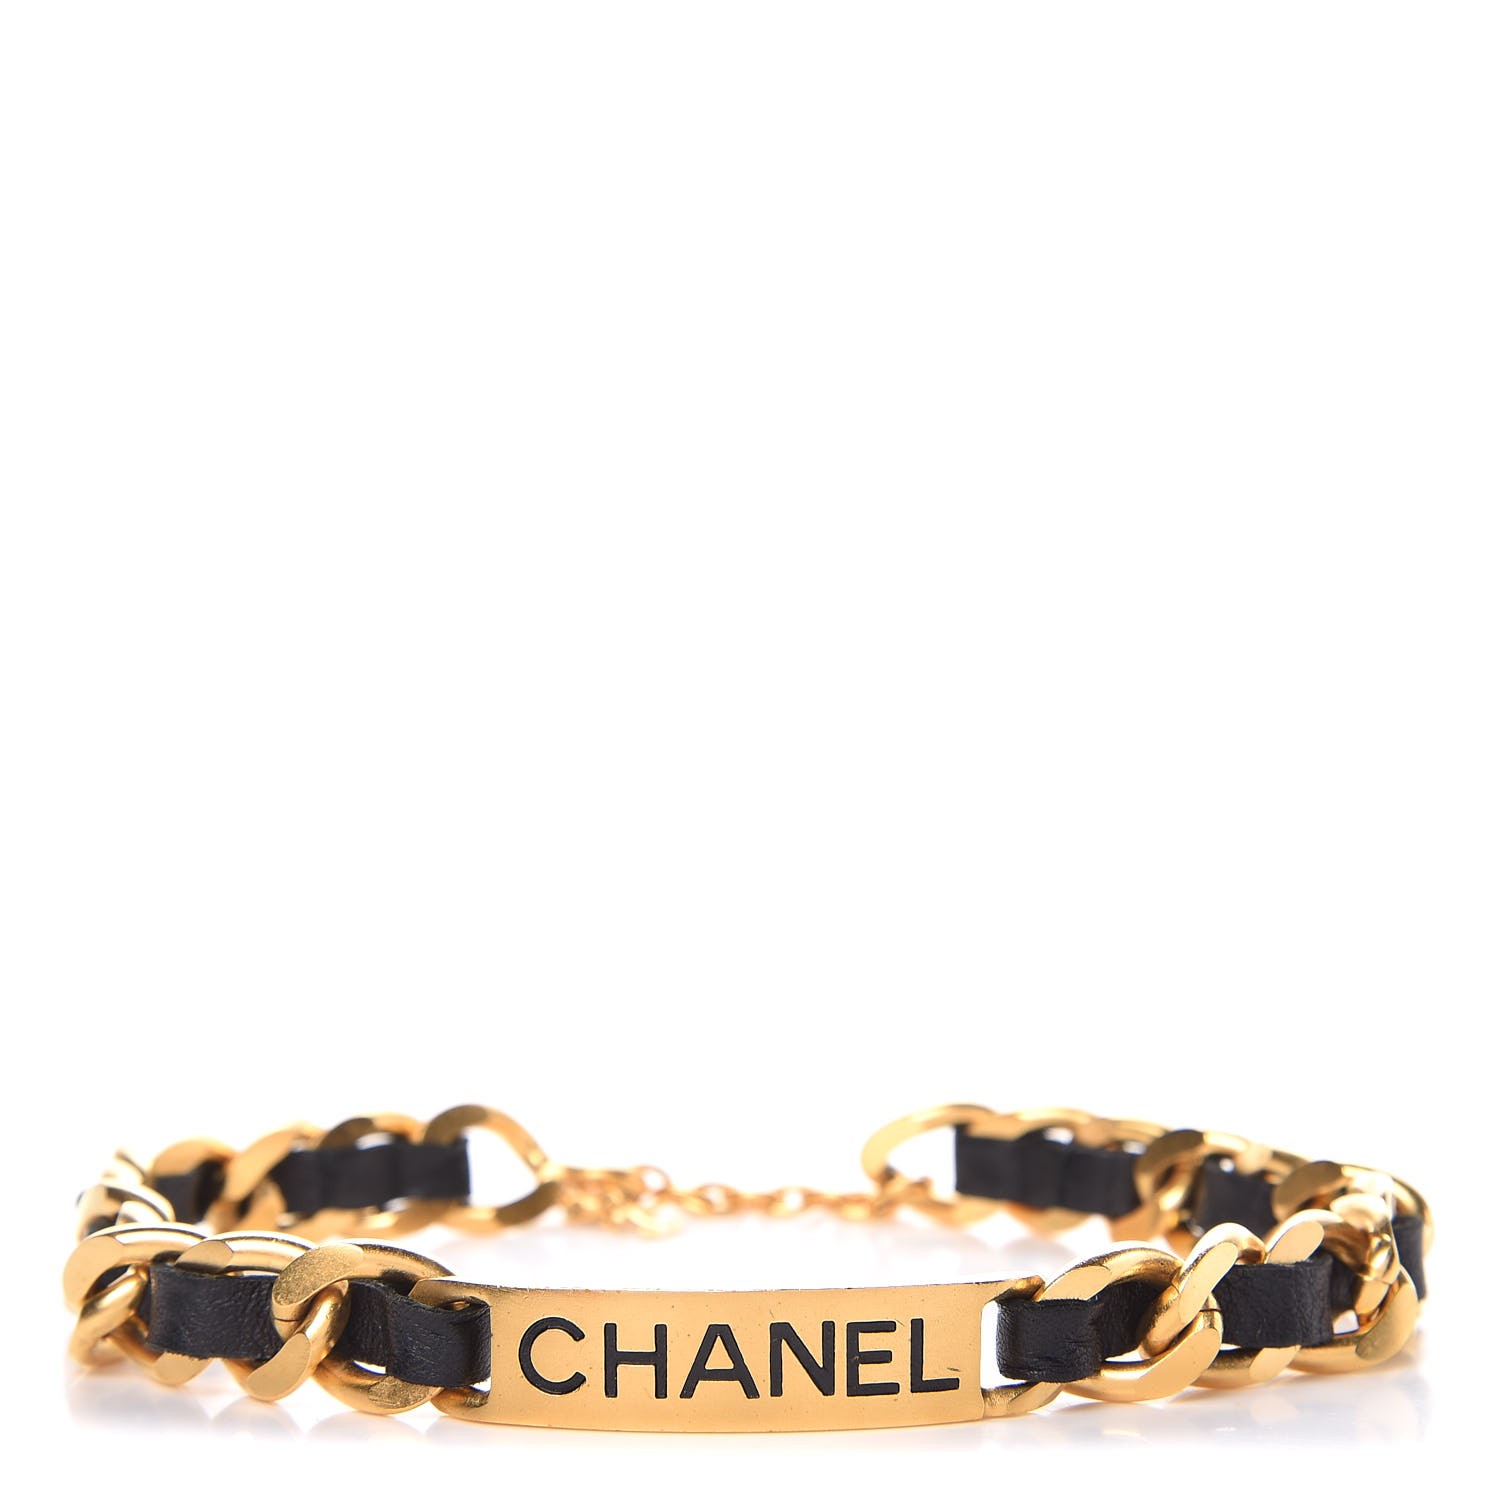 CHANEL Metal Lambskin Name Plate Choker Necklace Black Gold 324542